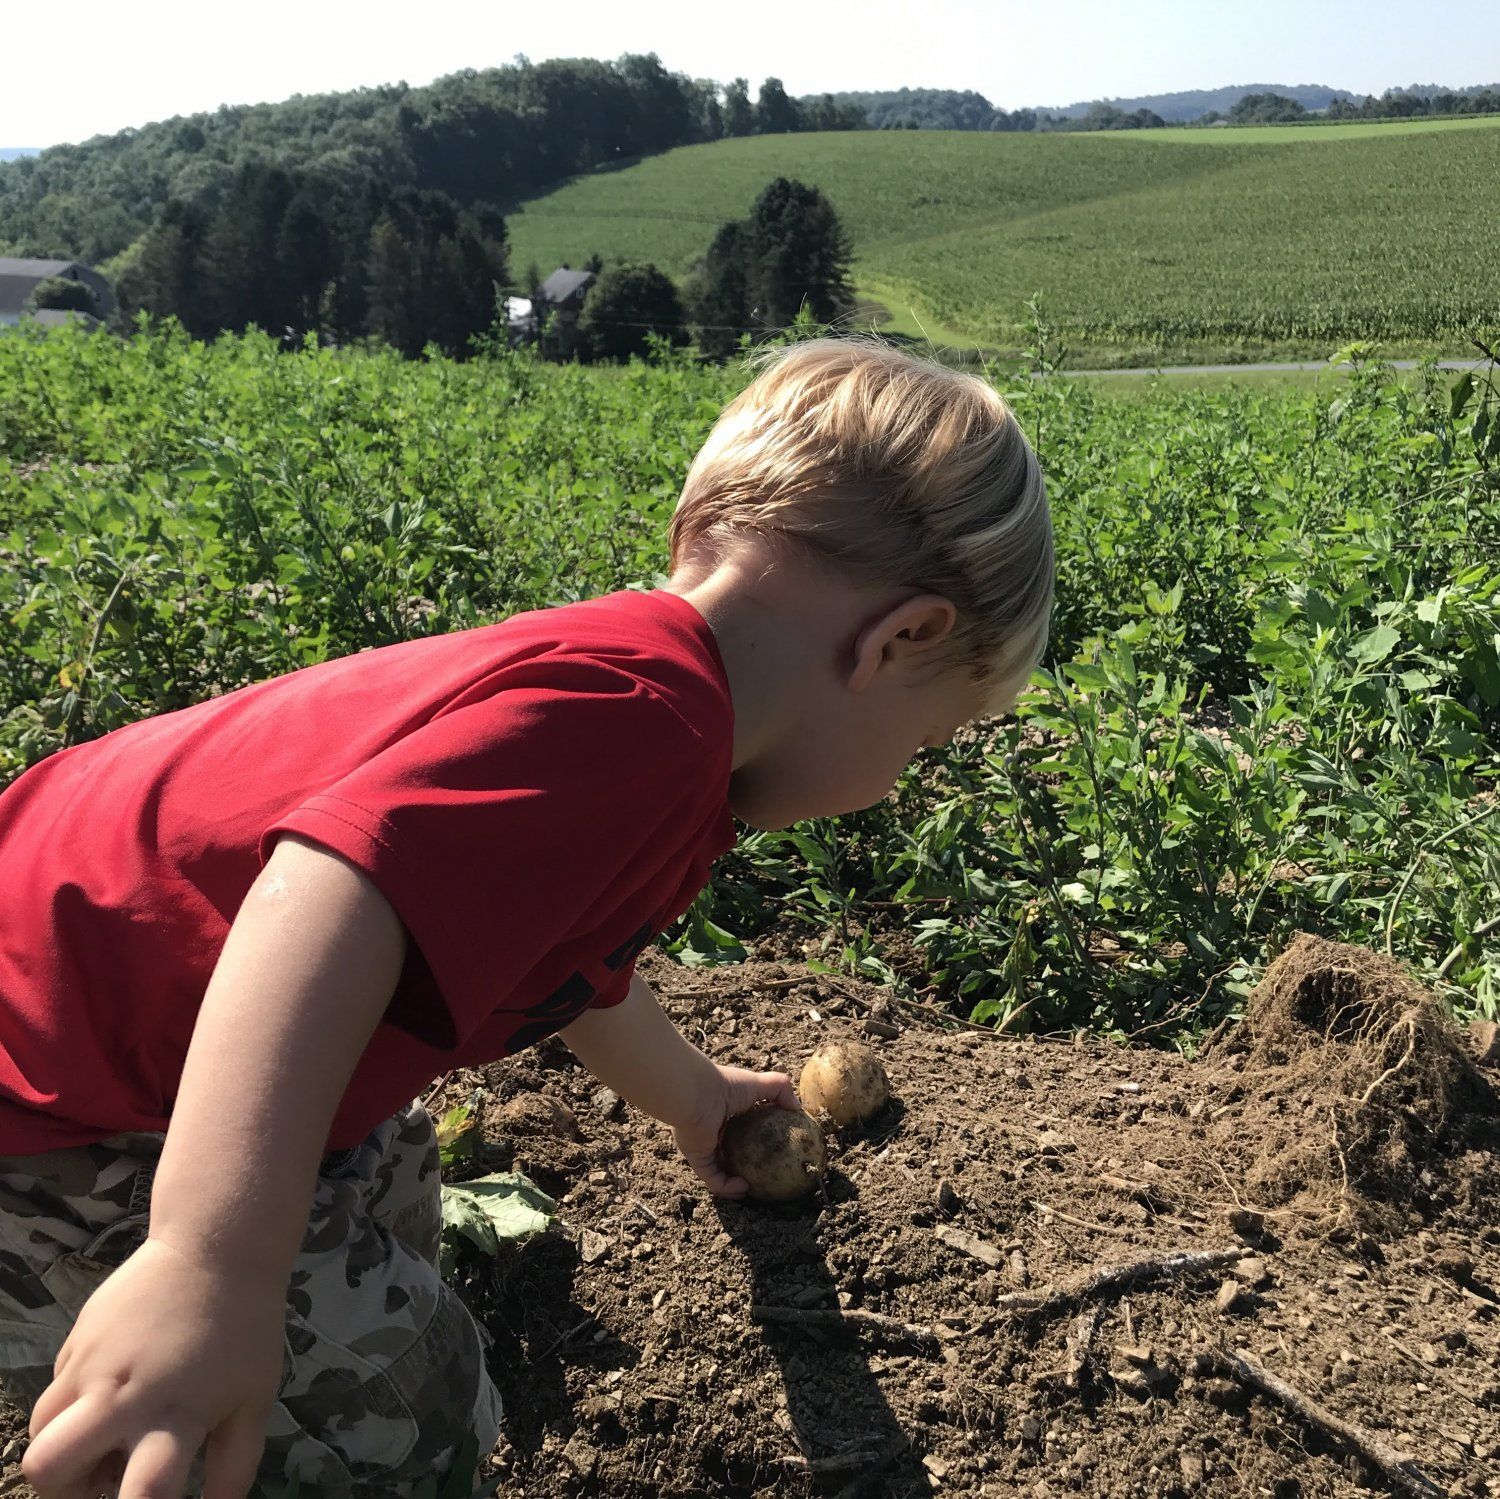 Previous Happening: Picking Potatoes begins in July +  Last Pizza Night